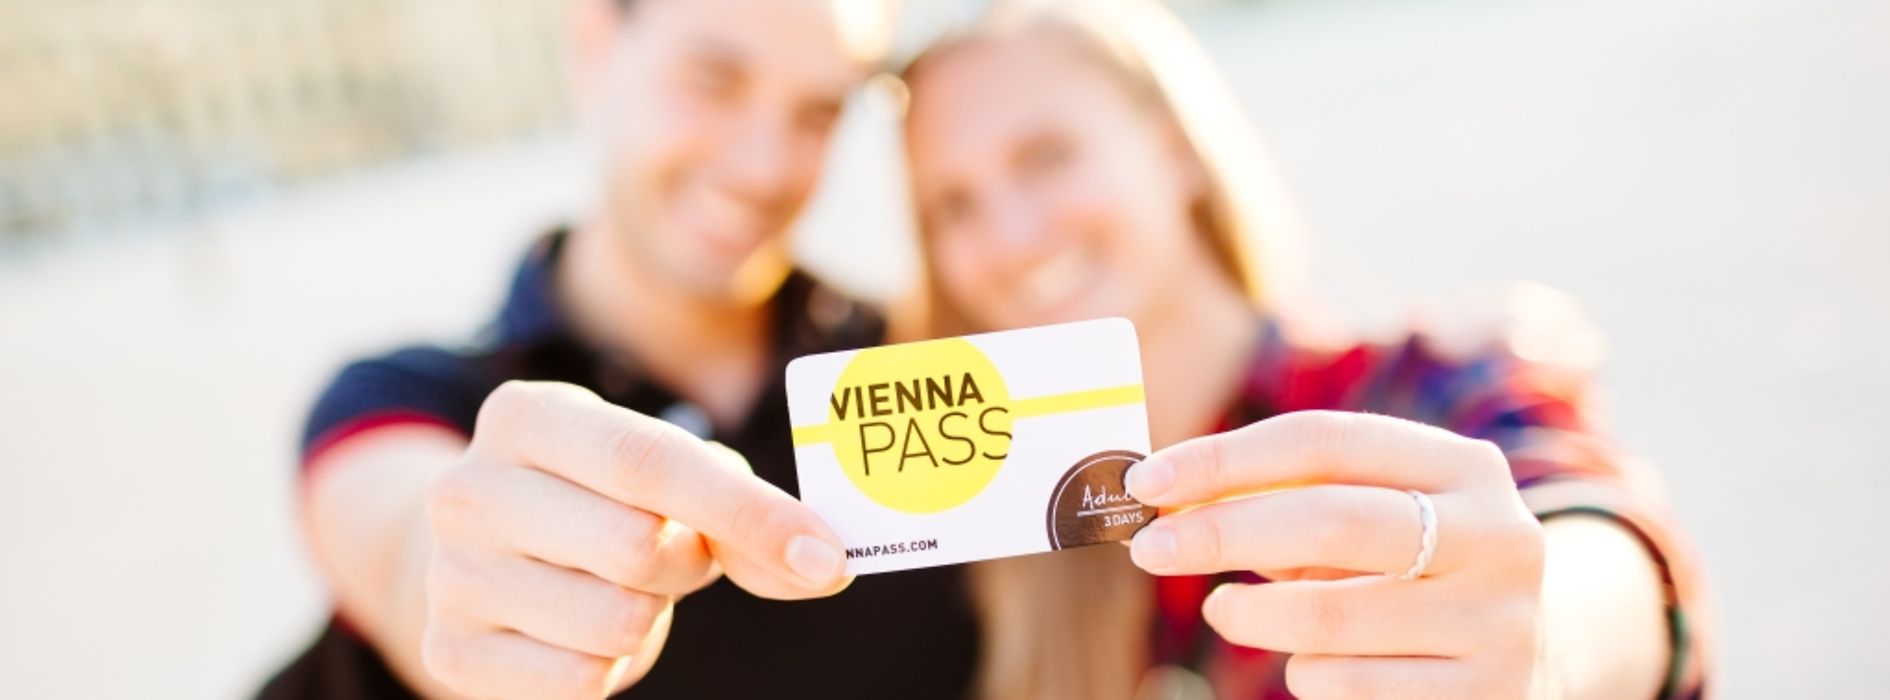 Couple with the Vienna pass